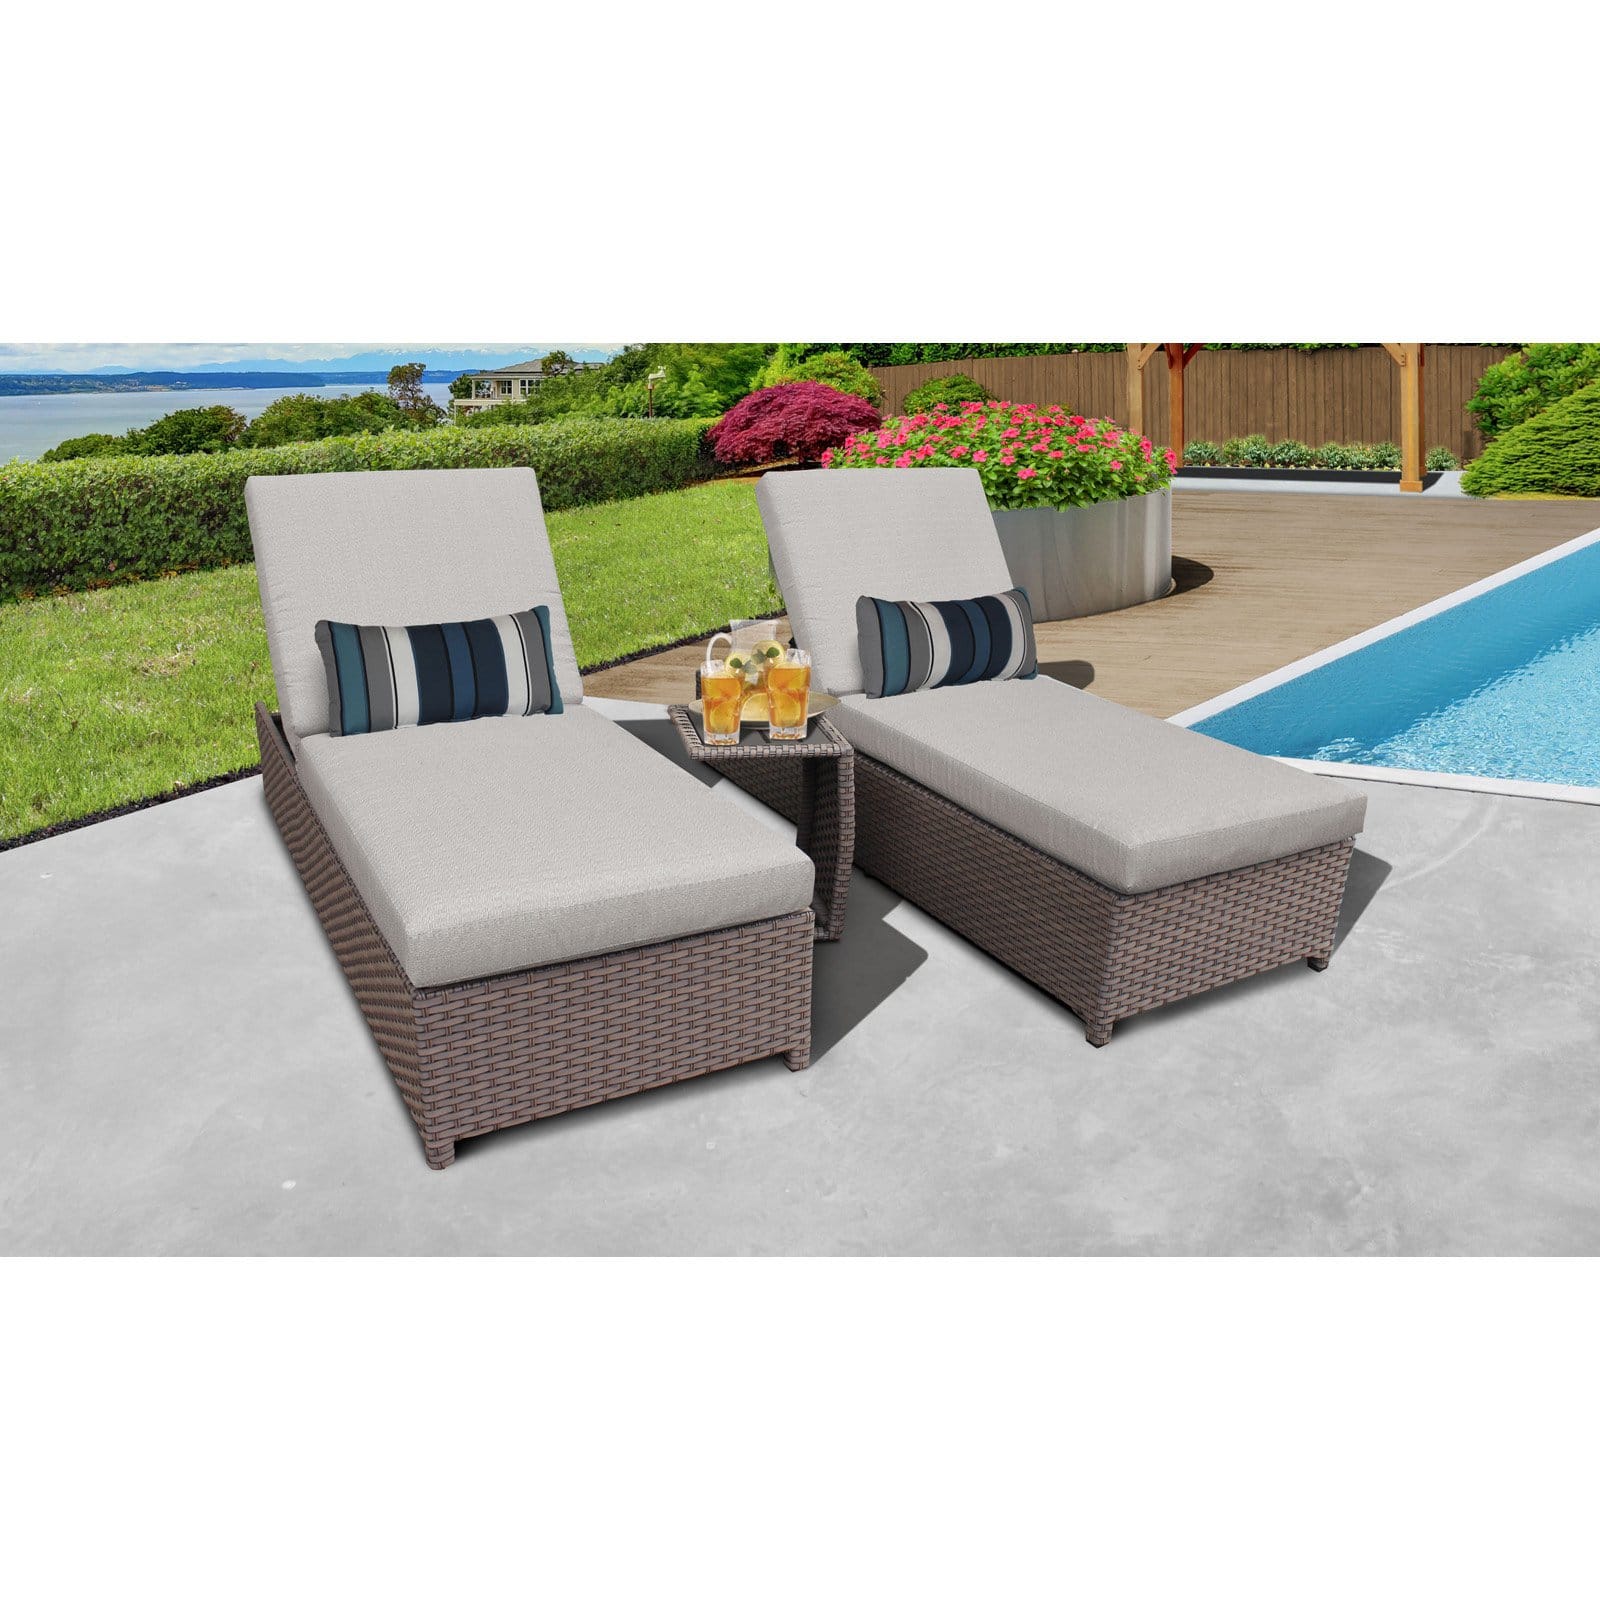 TK Classics Florence 3 Piece Wheeled Wicker Outdoor Chaise Lounge Set - image 4 of 11